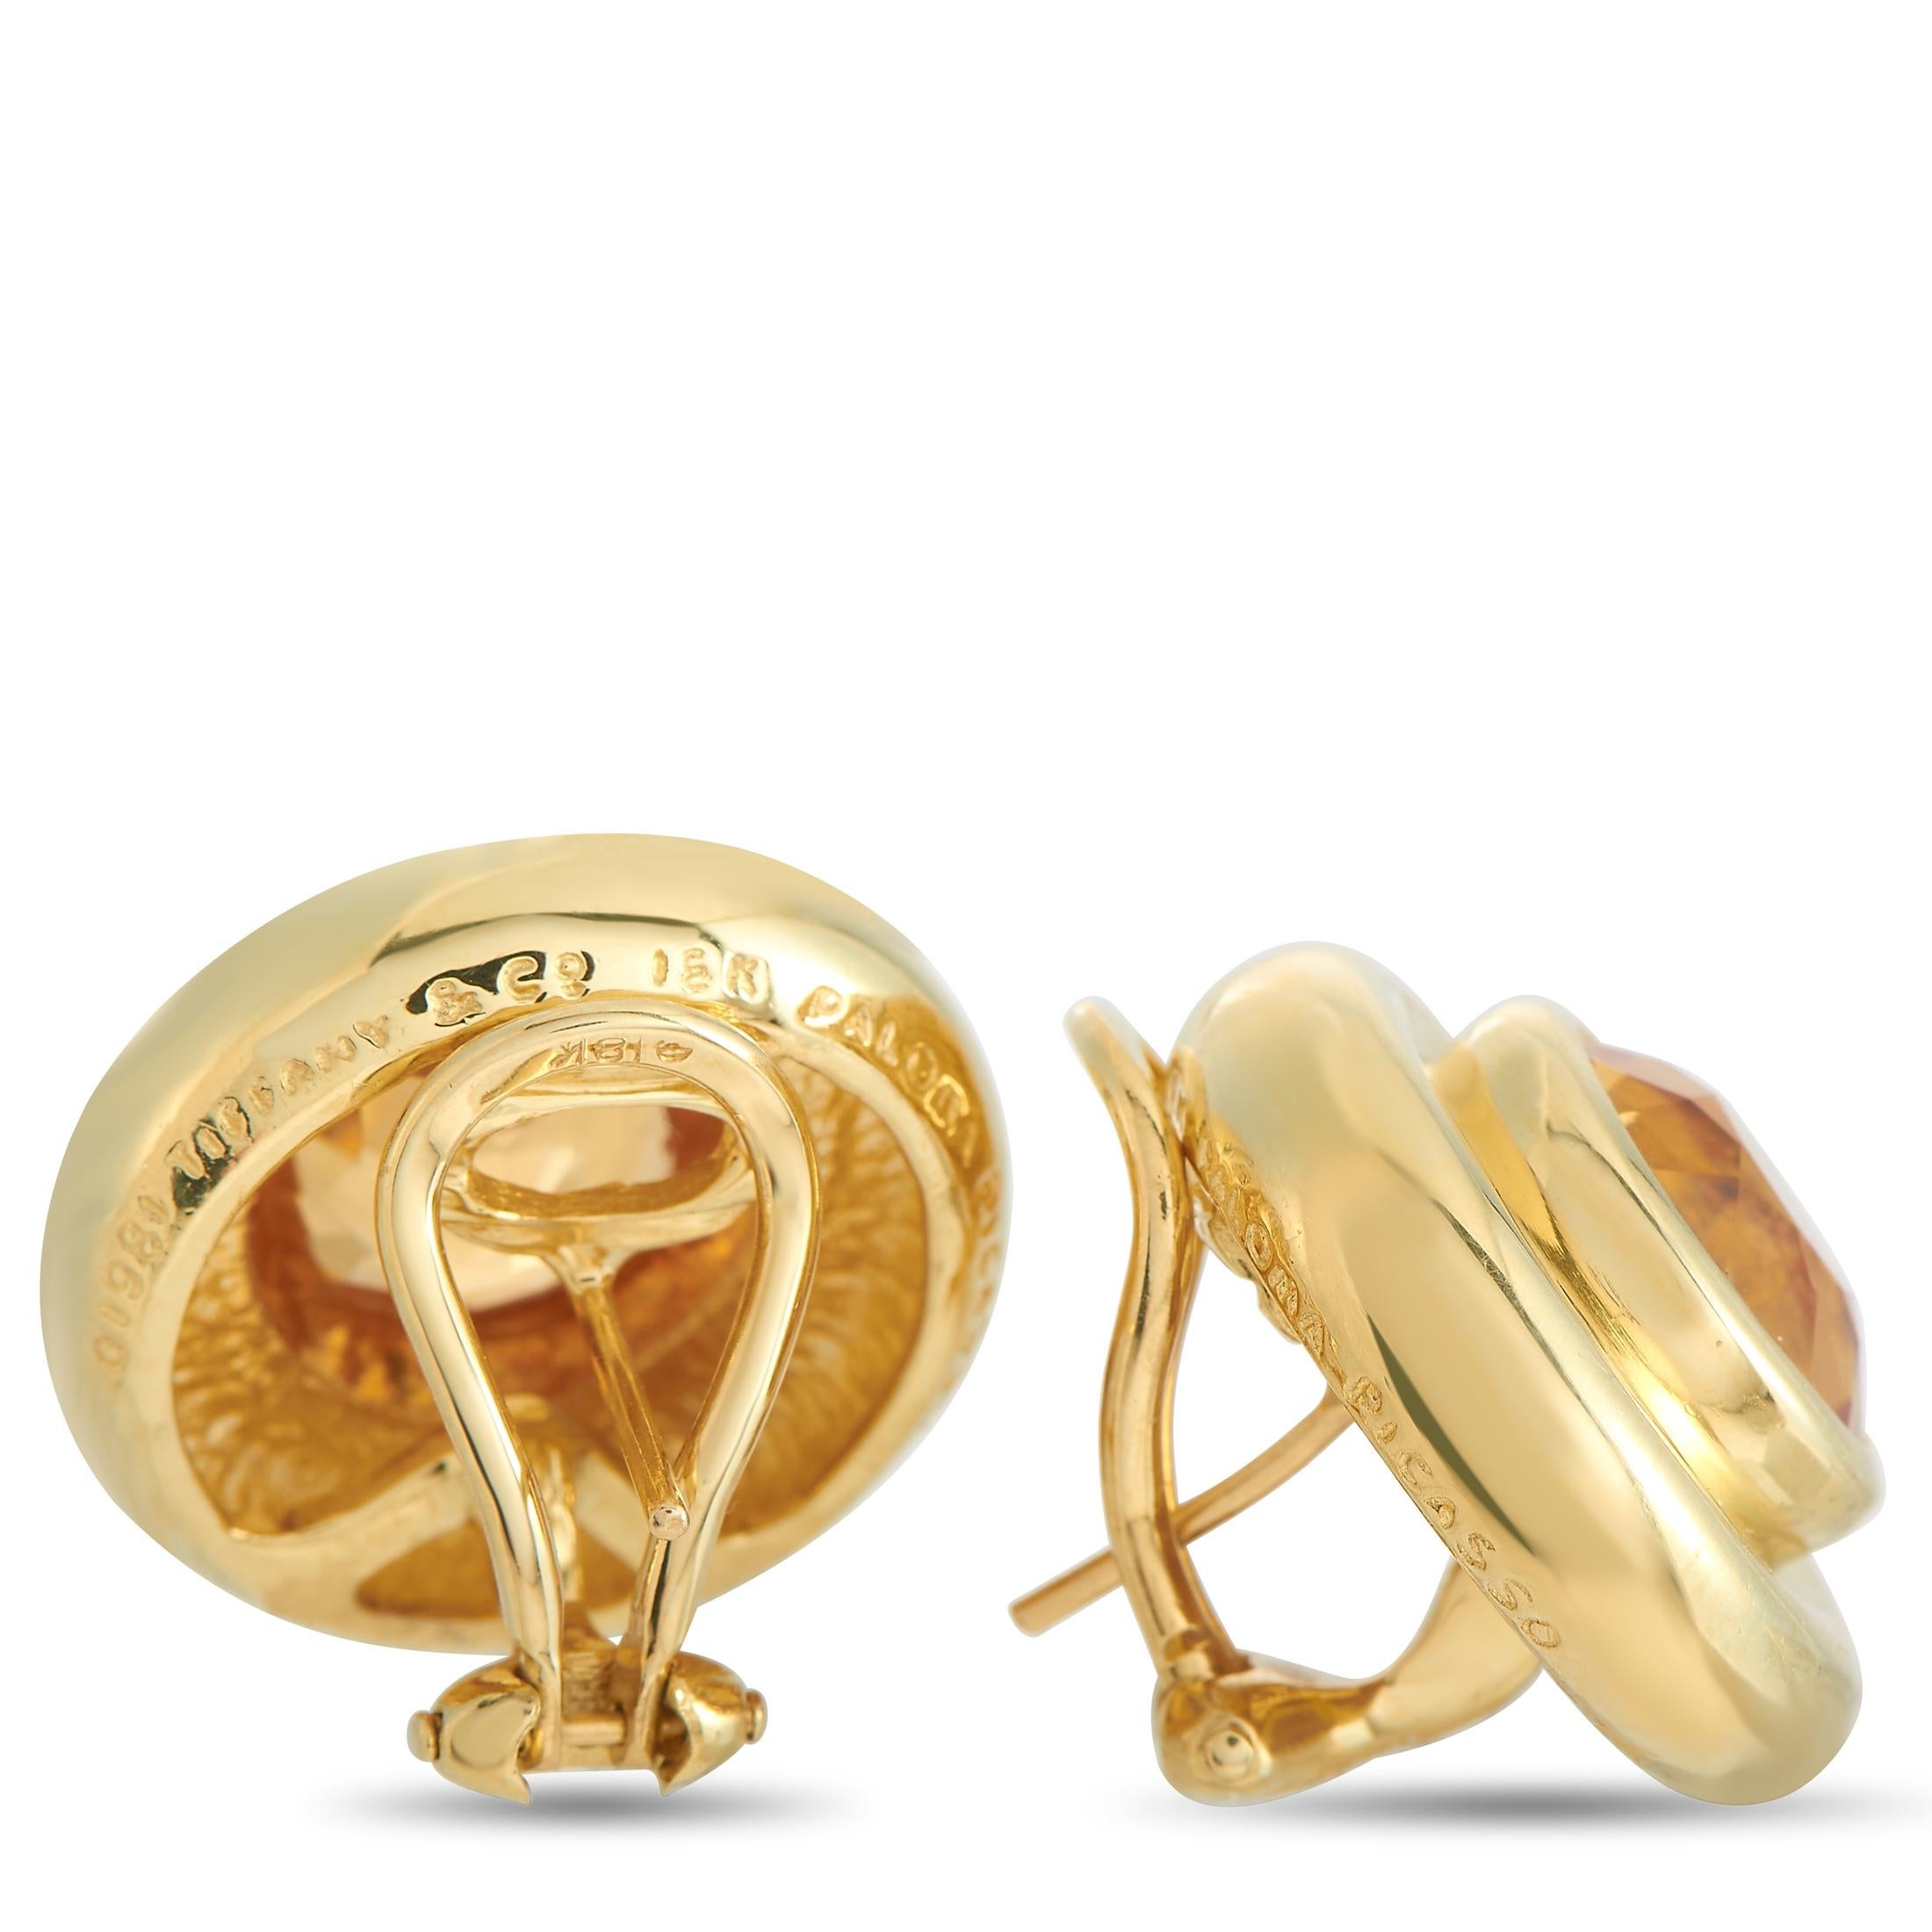 These Paloma Picasso earrings from Tiffany & Co. possess an inherent warmth and opulence. At the center of the simplistic 18K Yellow Gold setting, you’ll find a glittering yellow citrine gemstone. Each one measures 0.75” round and is sure to act as